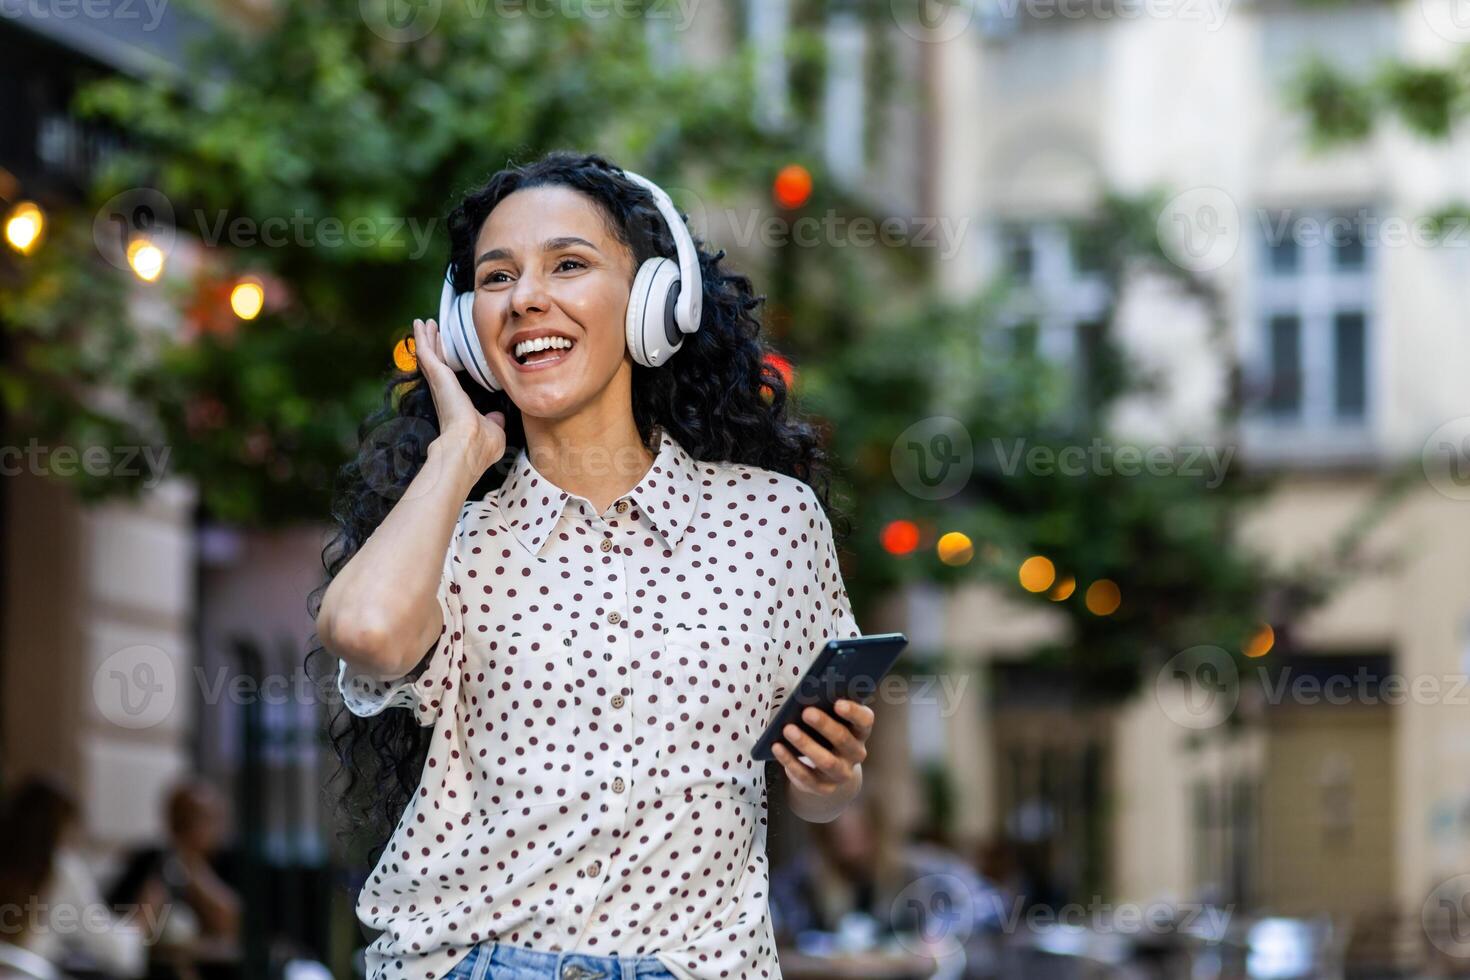 Beautiful young Latin American woman walks in the evening city on a trip, woman with headphones listens to music and dances and sings, uses an online radio application on her phone photo